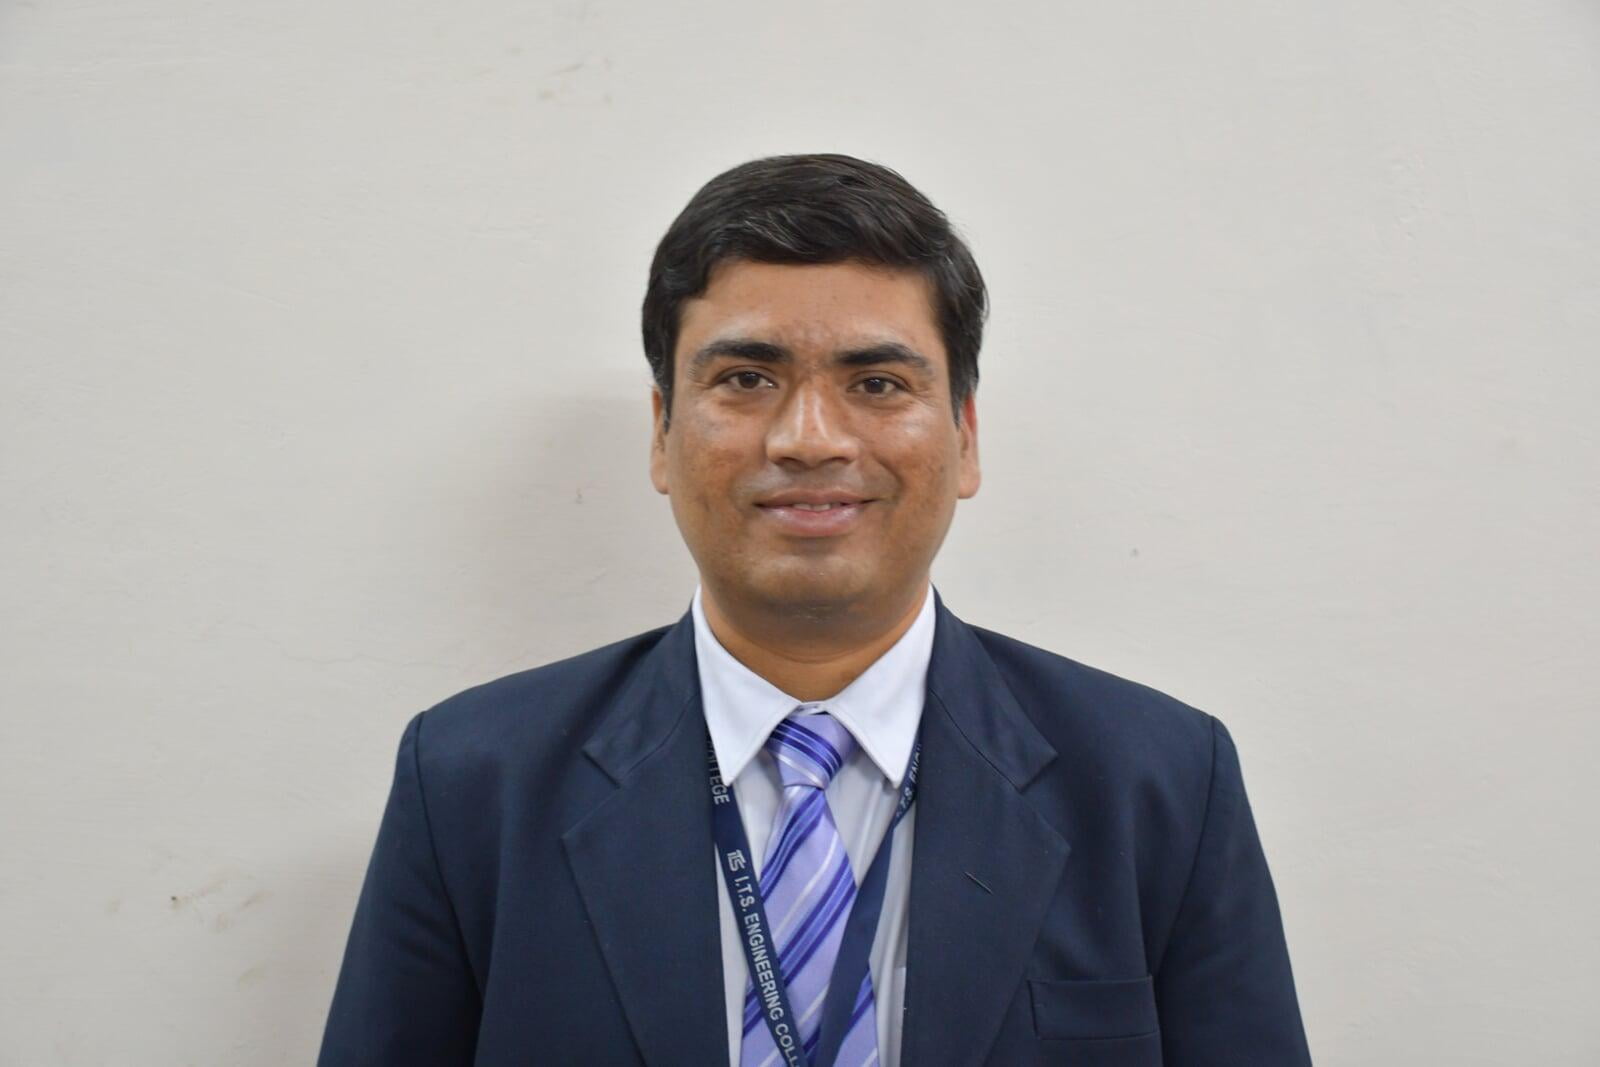 Mr. Praveen Bhola B.Tech ECE Faculty at ITS